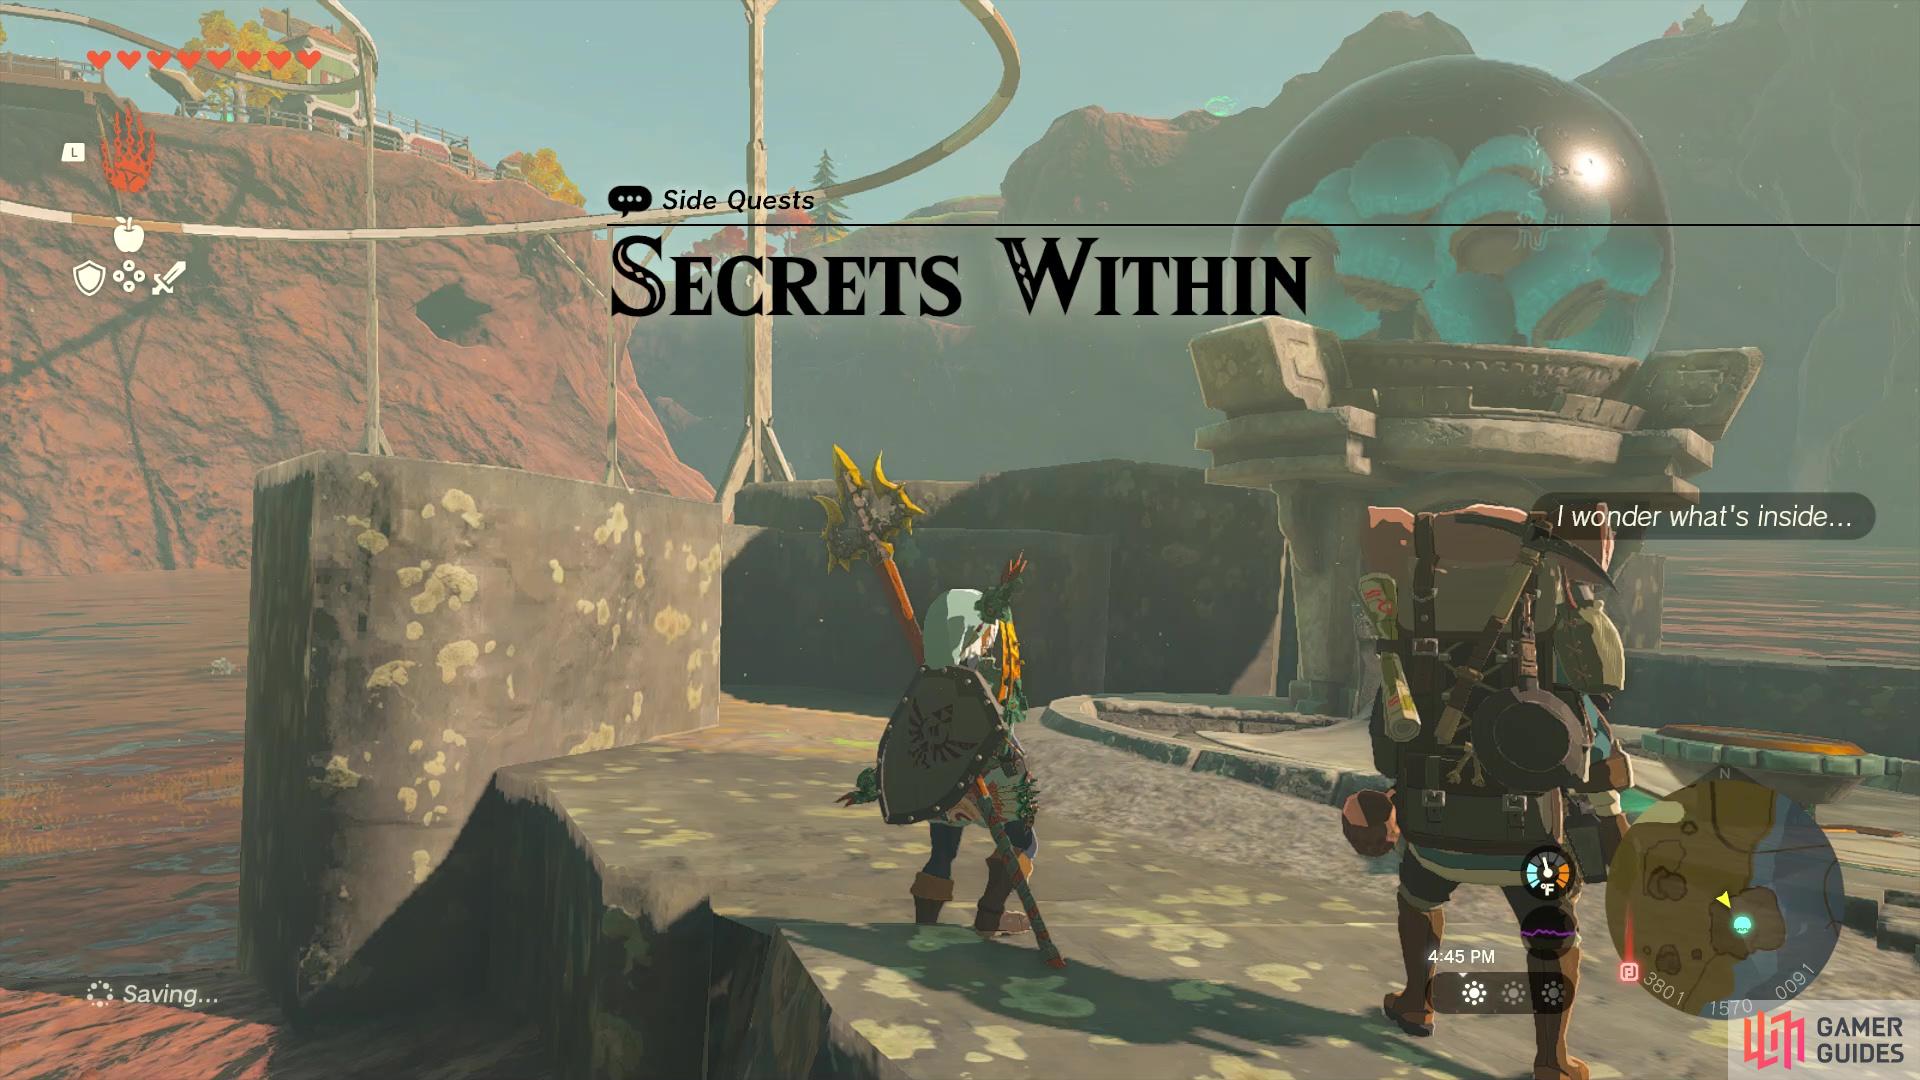 The Secrets Within side quest is found just outside of Tarrey Town.